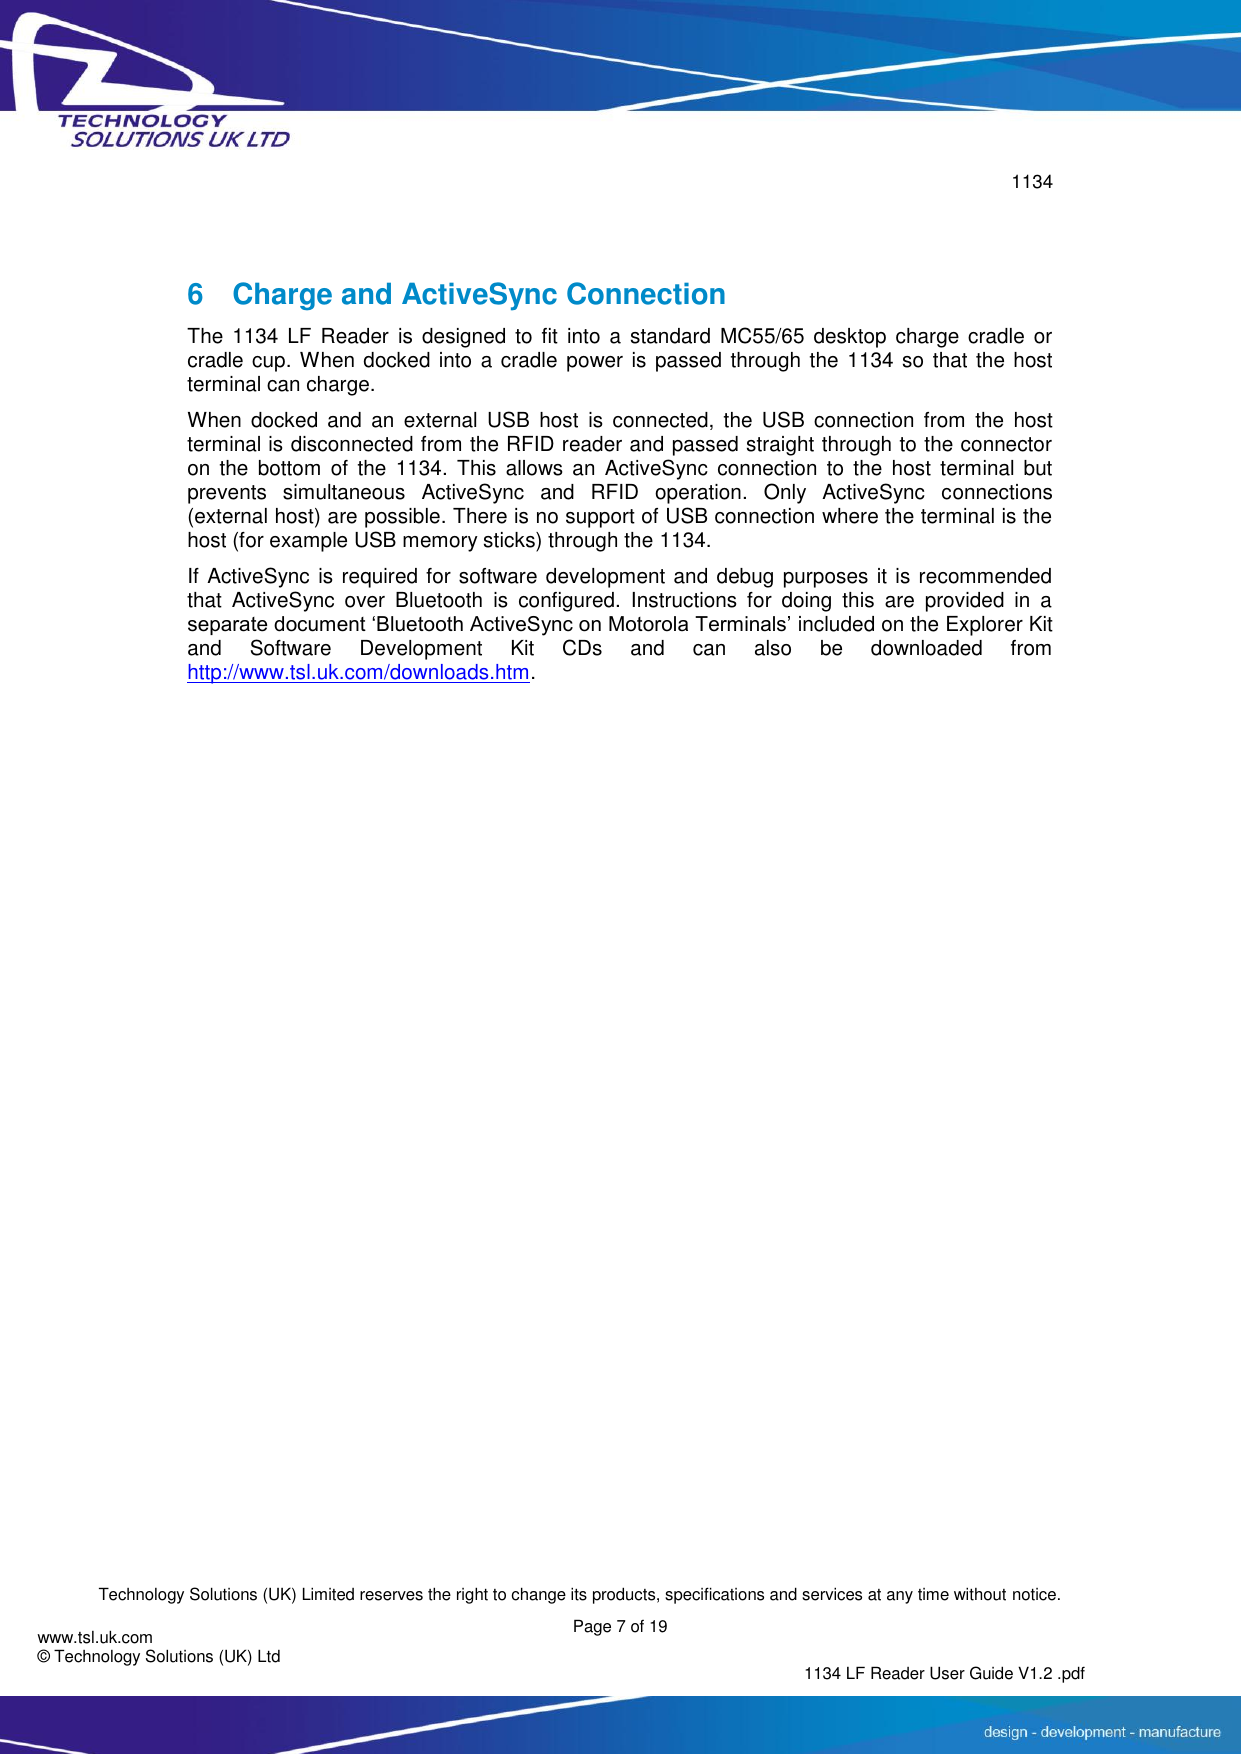        1134  Technology Solutions (UK) Limited reserves the right to change its products, specifications and services at any time without notice.   Page 7 of 19 1134 LF Reader User Guide V1.2 .pdf www.tsl.uk.com © Technology Solutions (UK) Ltd   6  Charge and ActiveSync Connection The  1134 LF  Reader  is  designed  to  fit  into  a  standard  MC55/65  desktop  charge  cradle or cradle cup. When docked into  a cradle power is  passed through the 1134 so that the host terminal can charge. When docked  and  an  external  USB  host  is  connected,  the  USB  connection  from  the  host terminal is disconnected from the RFID reader and passed straight through to the connector on  the  bottom  of  the  1134.  This  allows an  ActiveSync  connection  to  the  host  terminal but prevents  simultaneous  ActiveSync  and  RFID  operation.  Only  ActiveSync  connections (external host) are possible. There is no support of USB connection where the terminal is the host (for example USB memory sticks) through the 1134. If ActiveSync is required for software development and debug purposes it is recommended that  ActiveSync  over  Bluetooth  is  configured.  Instructions  for  doing  this  are  provided  in  a separate document ‘Bluetooth ActiveSync on Motorola Terminals’ included on the Explorer Kit and  Software  Development  Kit  CDs  and  can  also  be  downloaded  from http://www.tsl.uk.com/downloads.htm.       